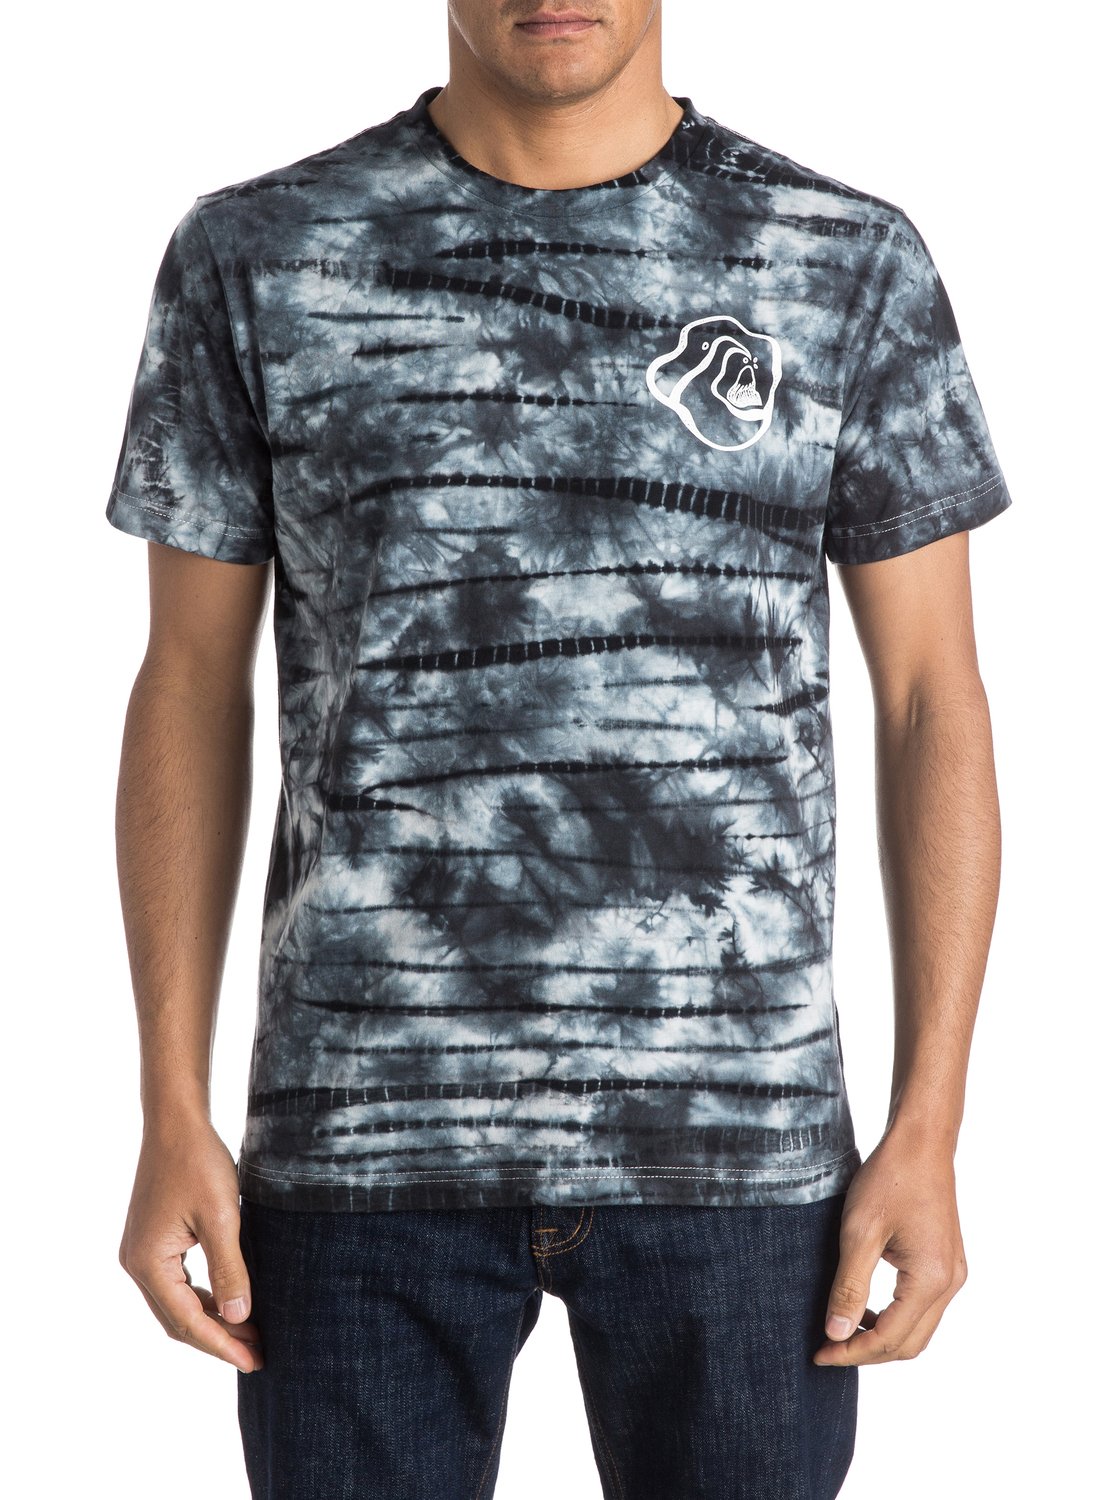 AM Vibes - Tee-Shirt pour homme - Quiksilver